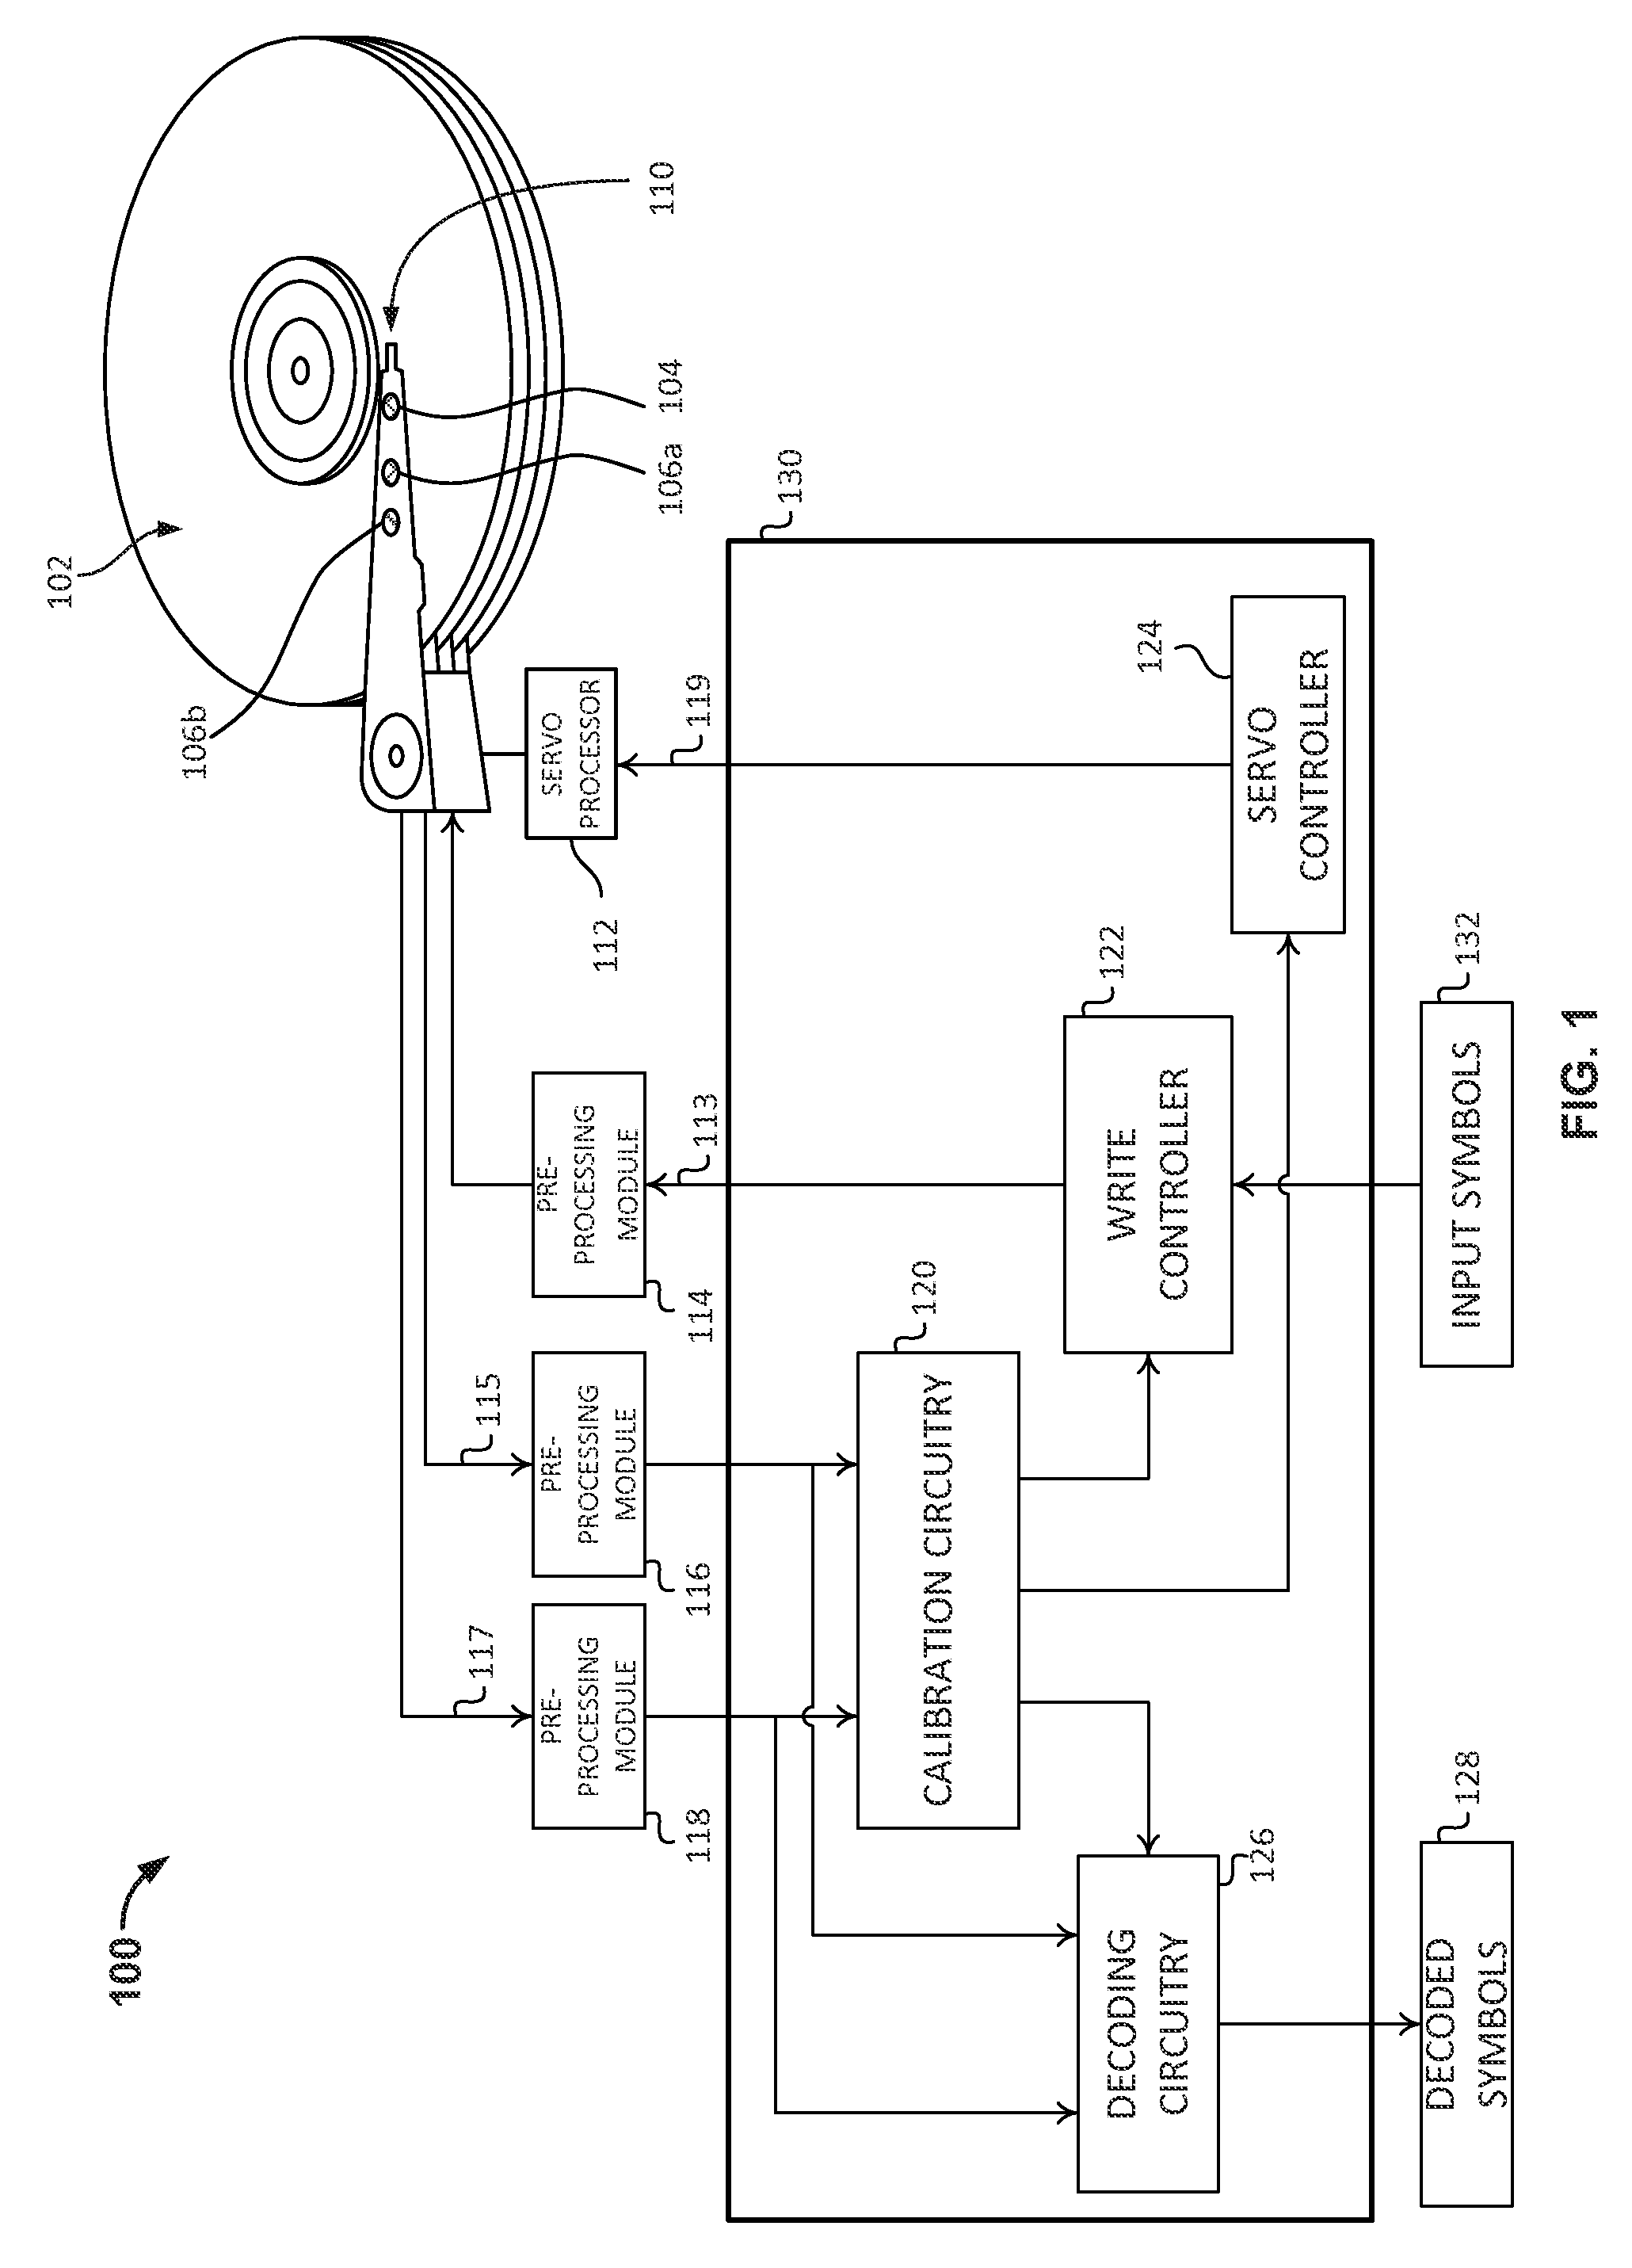 Systems and methods for calibrating read and write operations in two dimensional magnetic recording